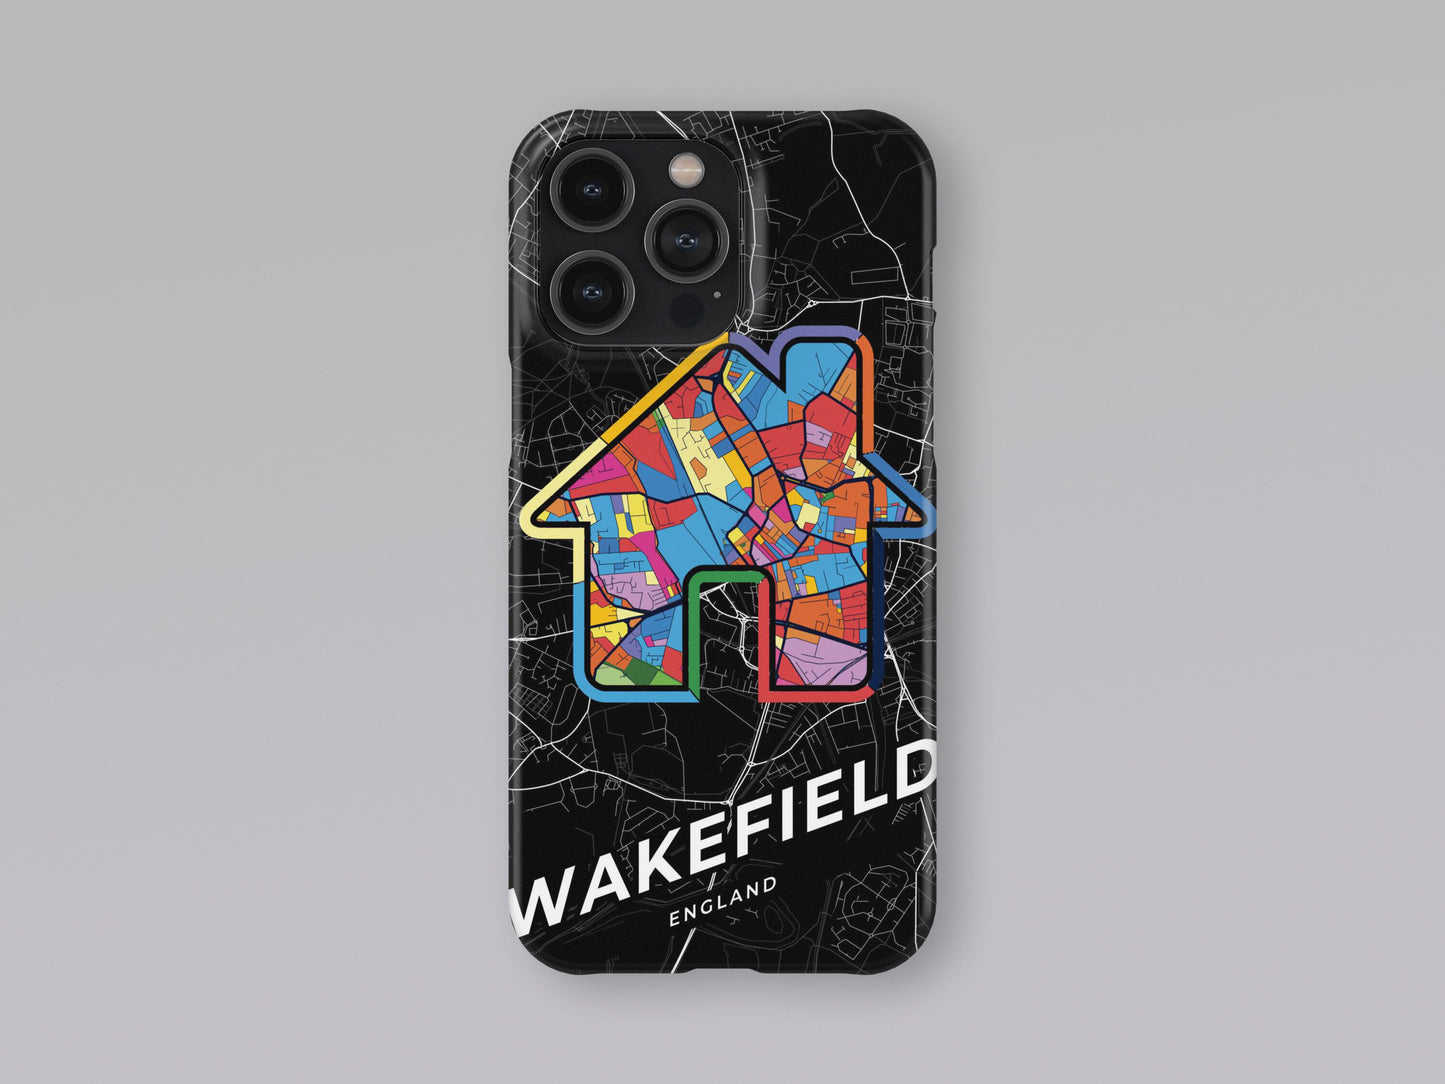 Wakefield England slim phone case with colorful icon 3